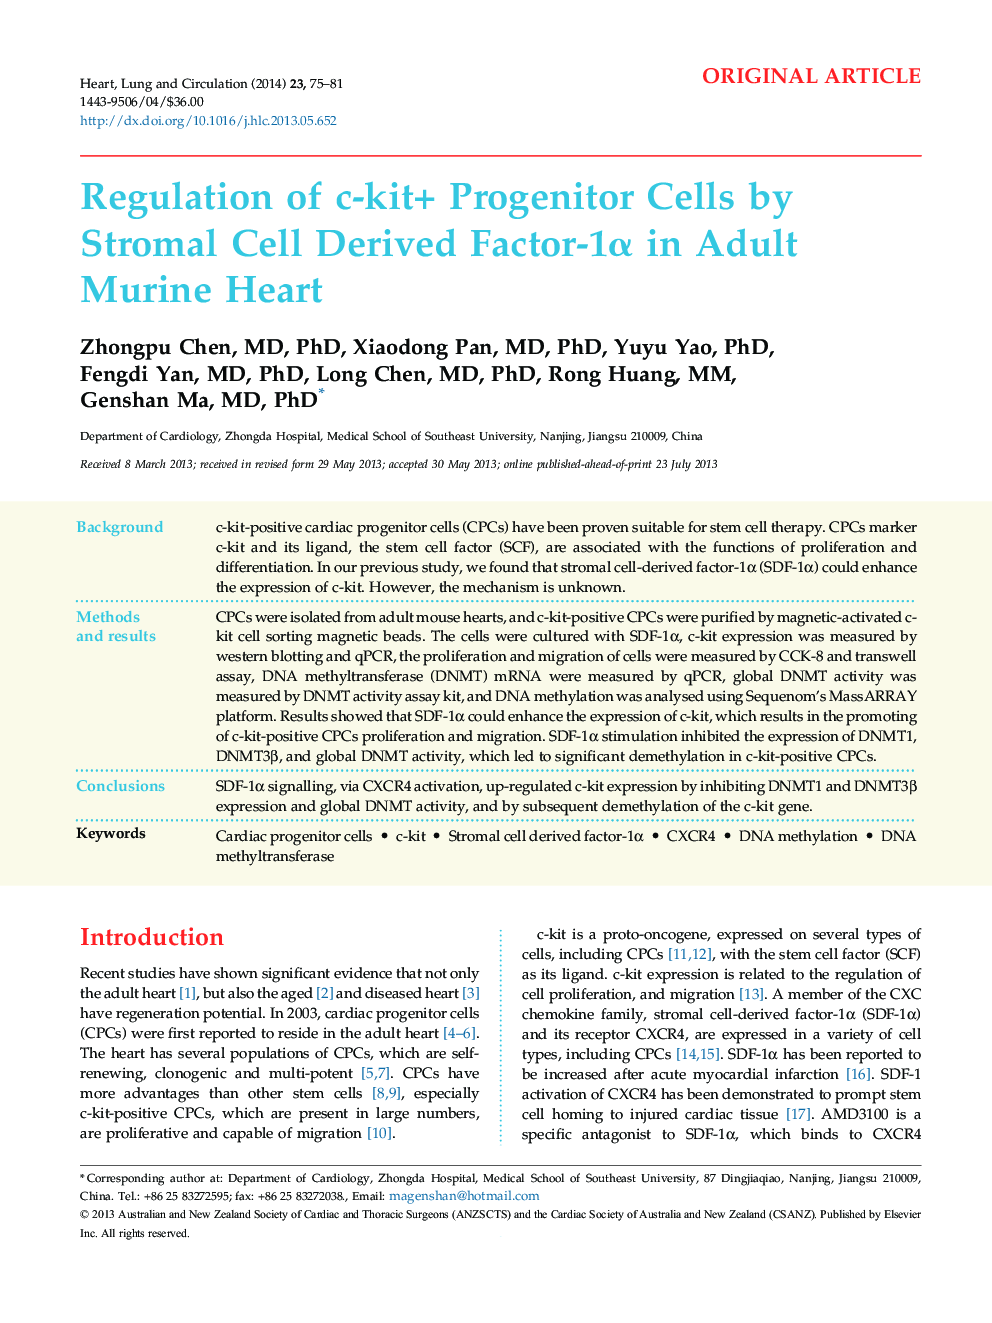 Regulation of c-kit+ Progenitor Cells by Stromal Cell Derived Factor-1α in Adult Murine Heart